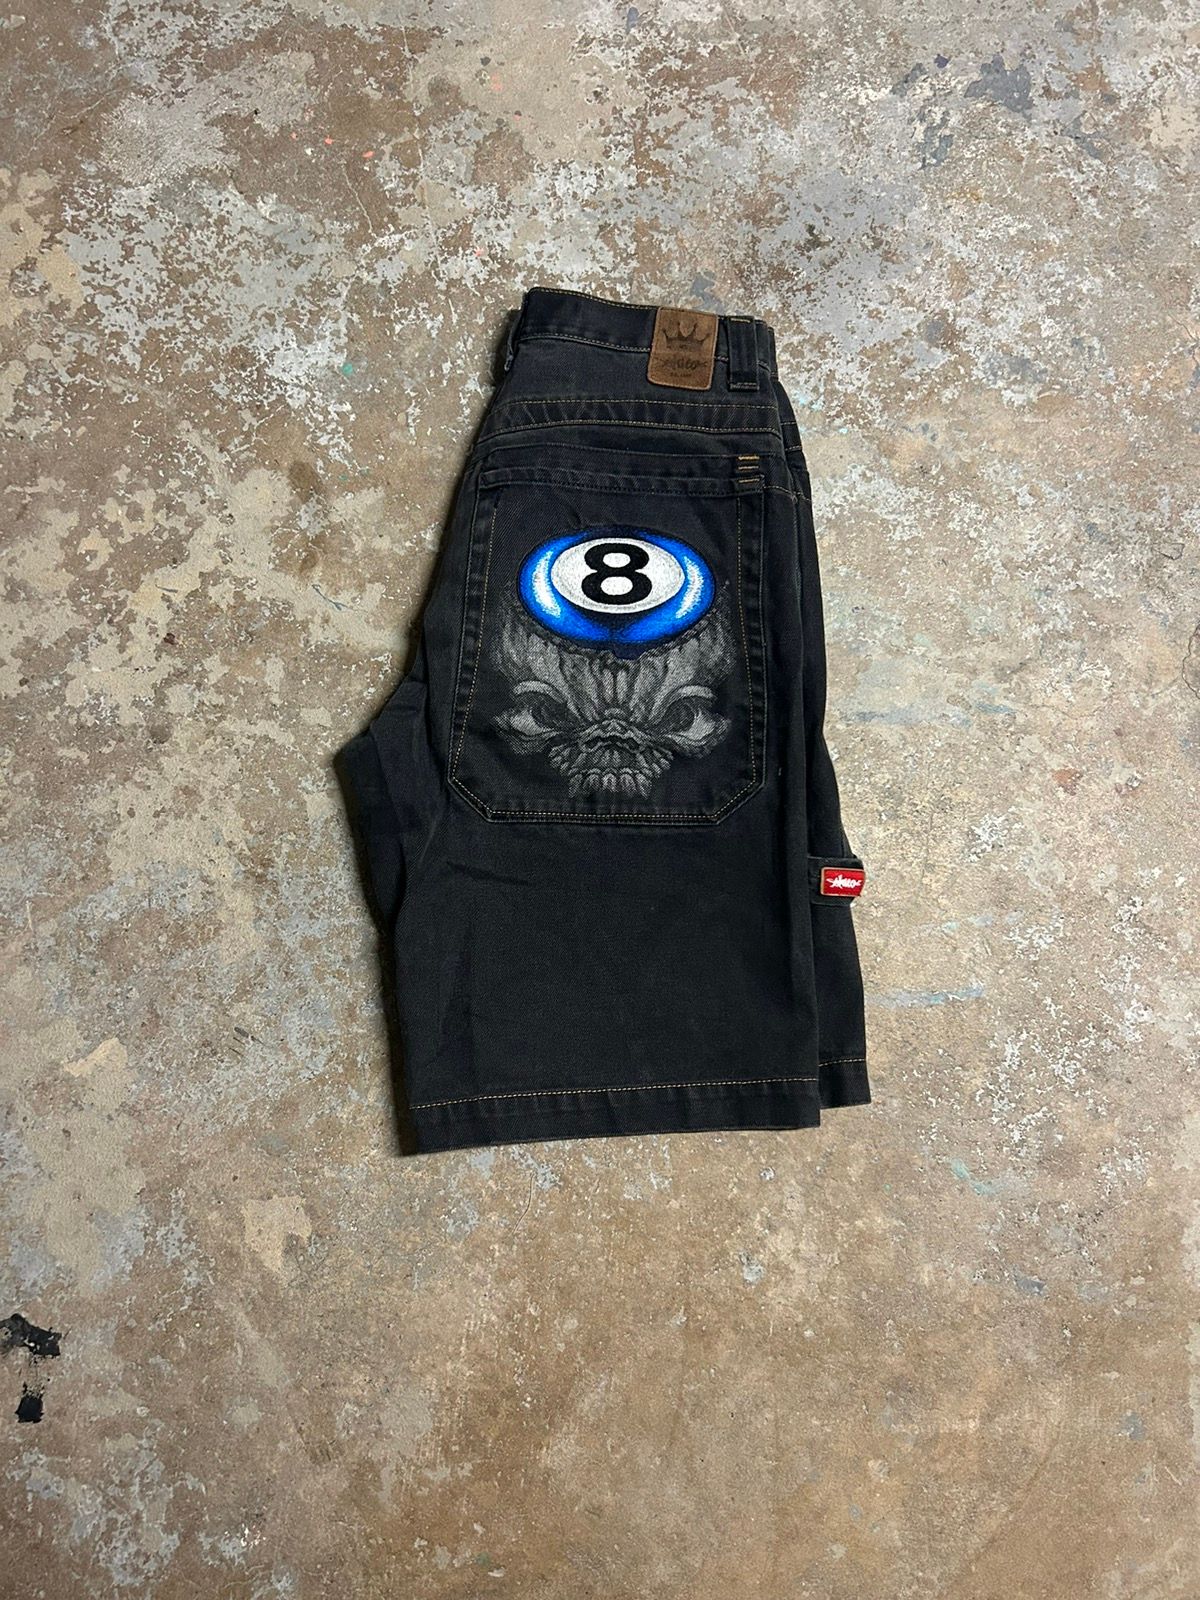 Pre-owned Jnco X Vintage Jnco Jeans Eight Ball Skull Jean Shorts In Black